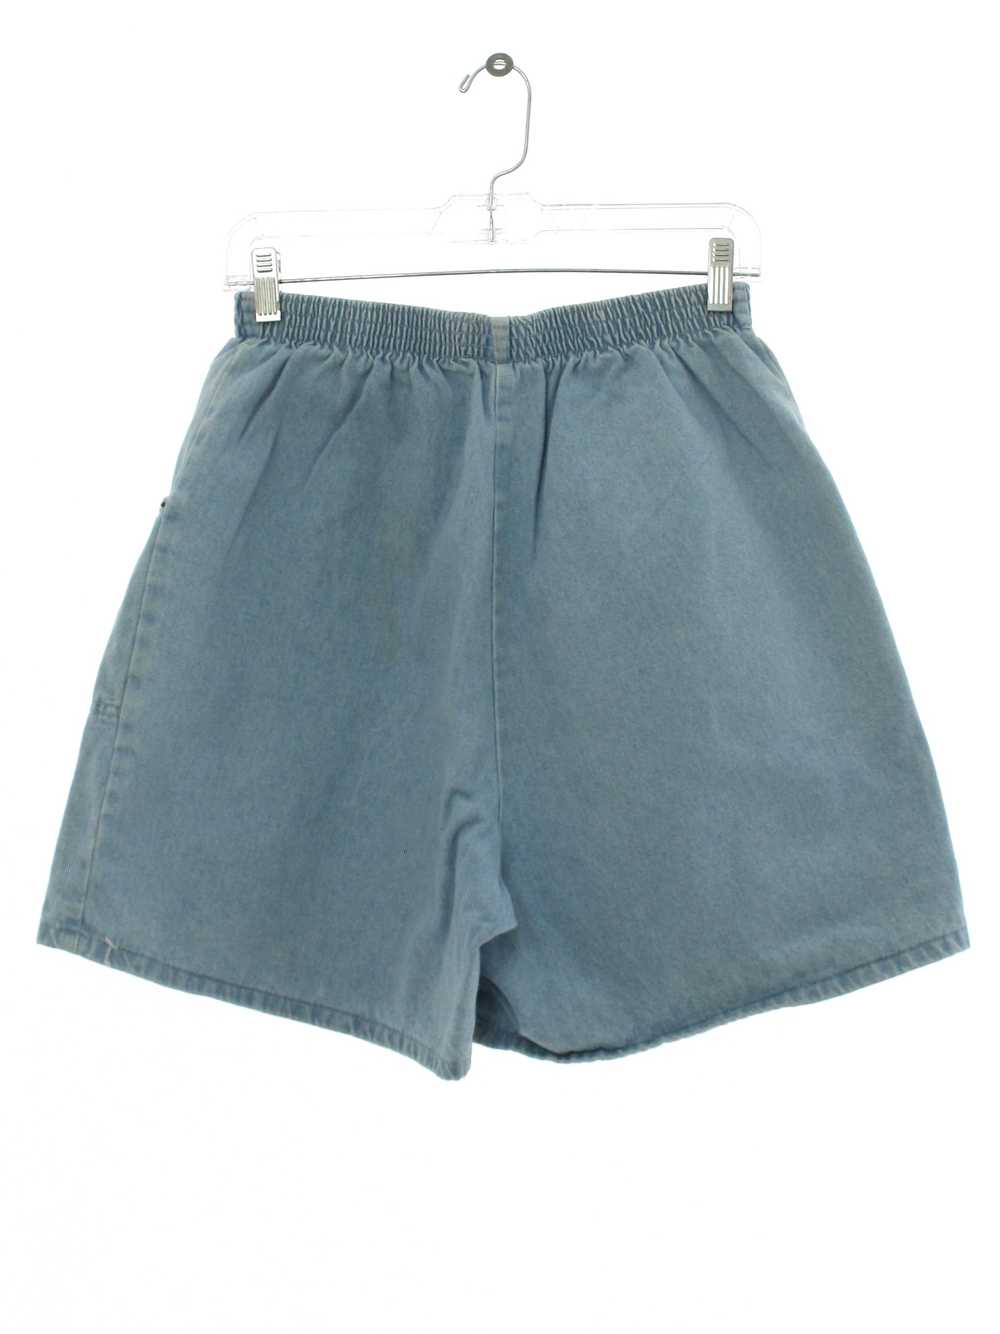 1990's Chic Womens Chic Denim Jeans Shorts - image 3